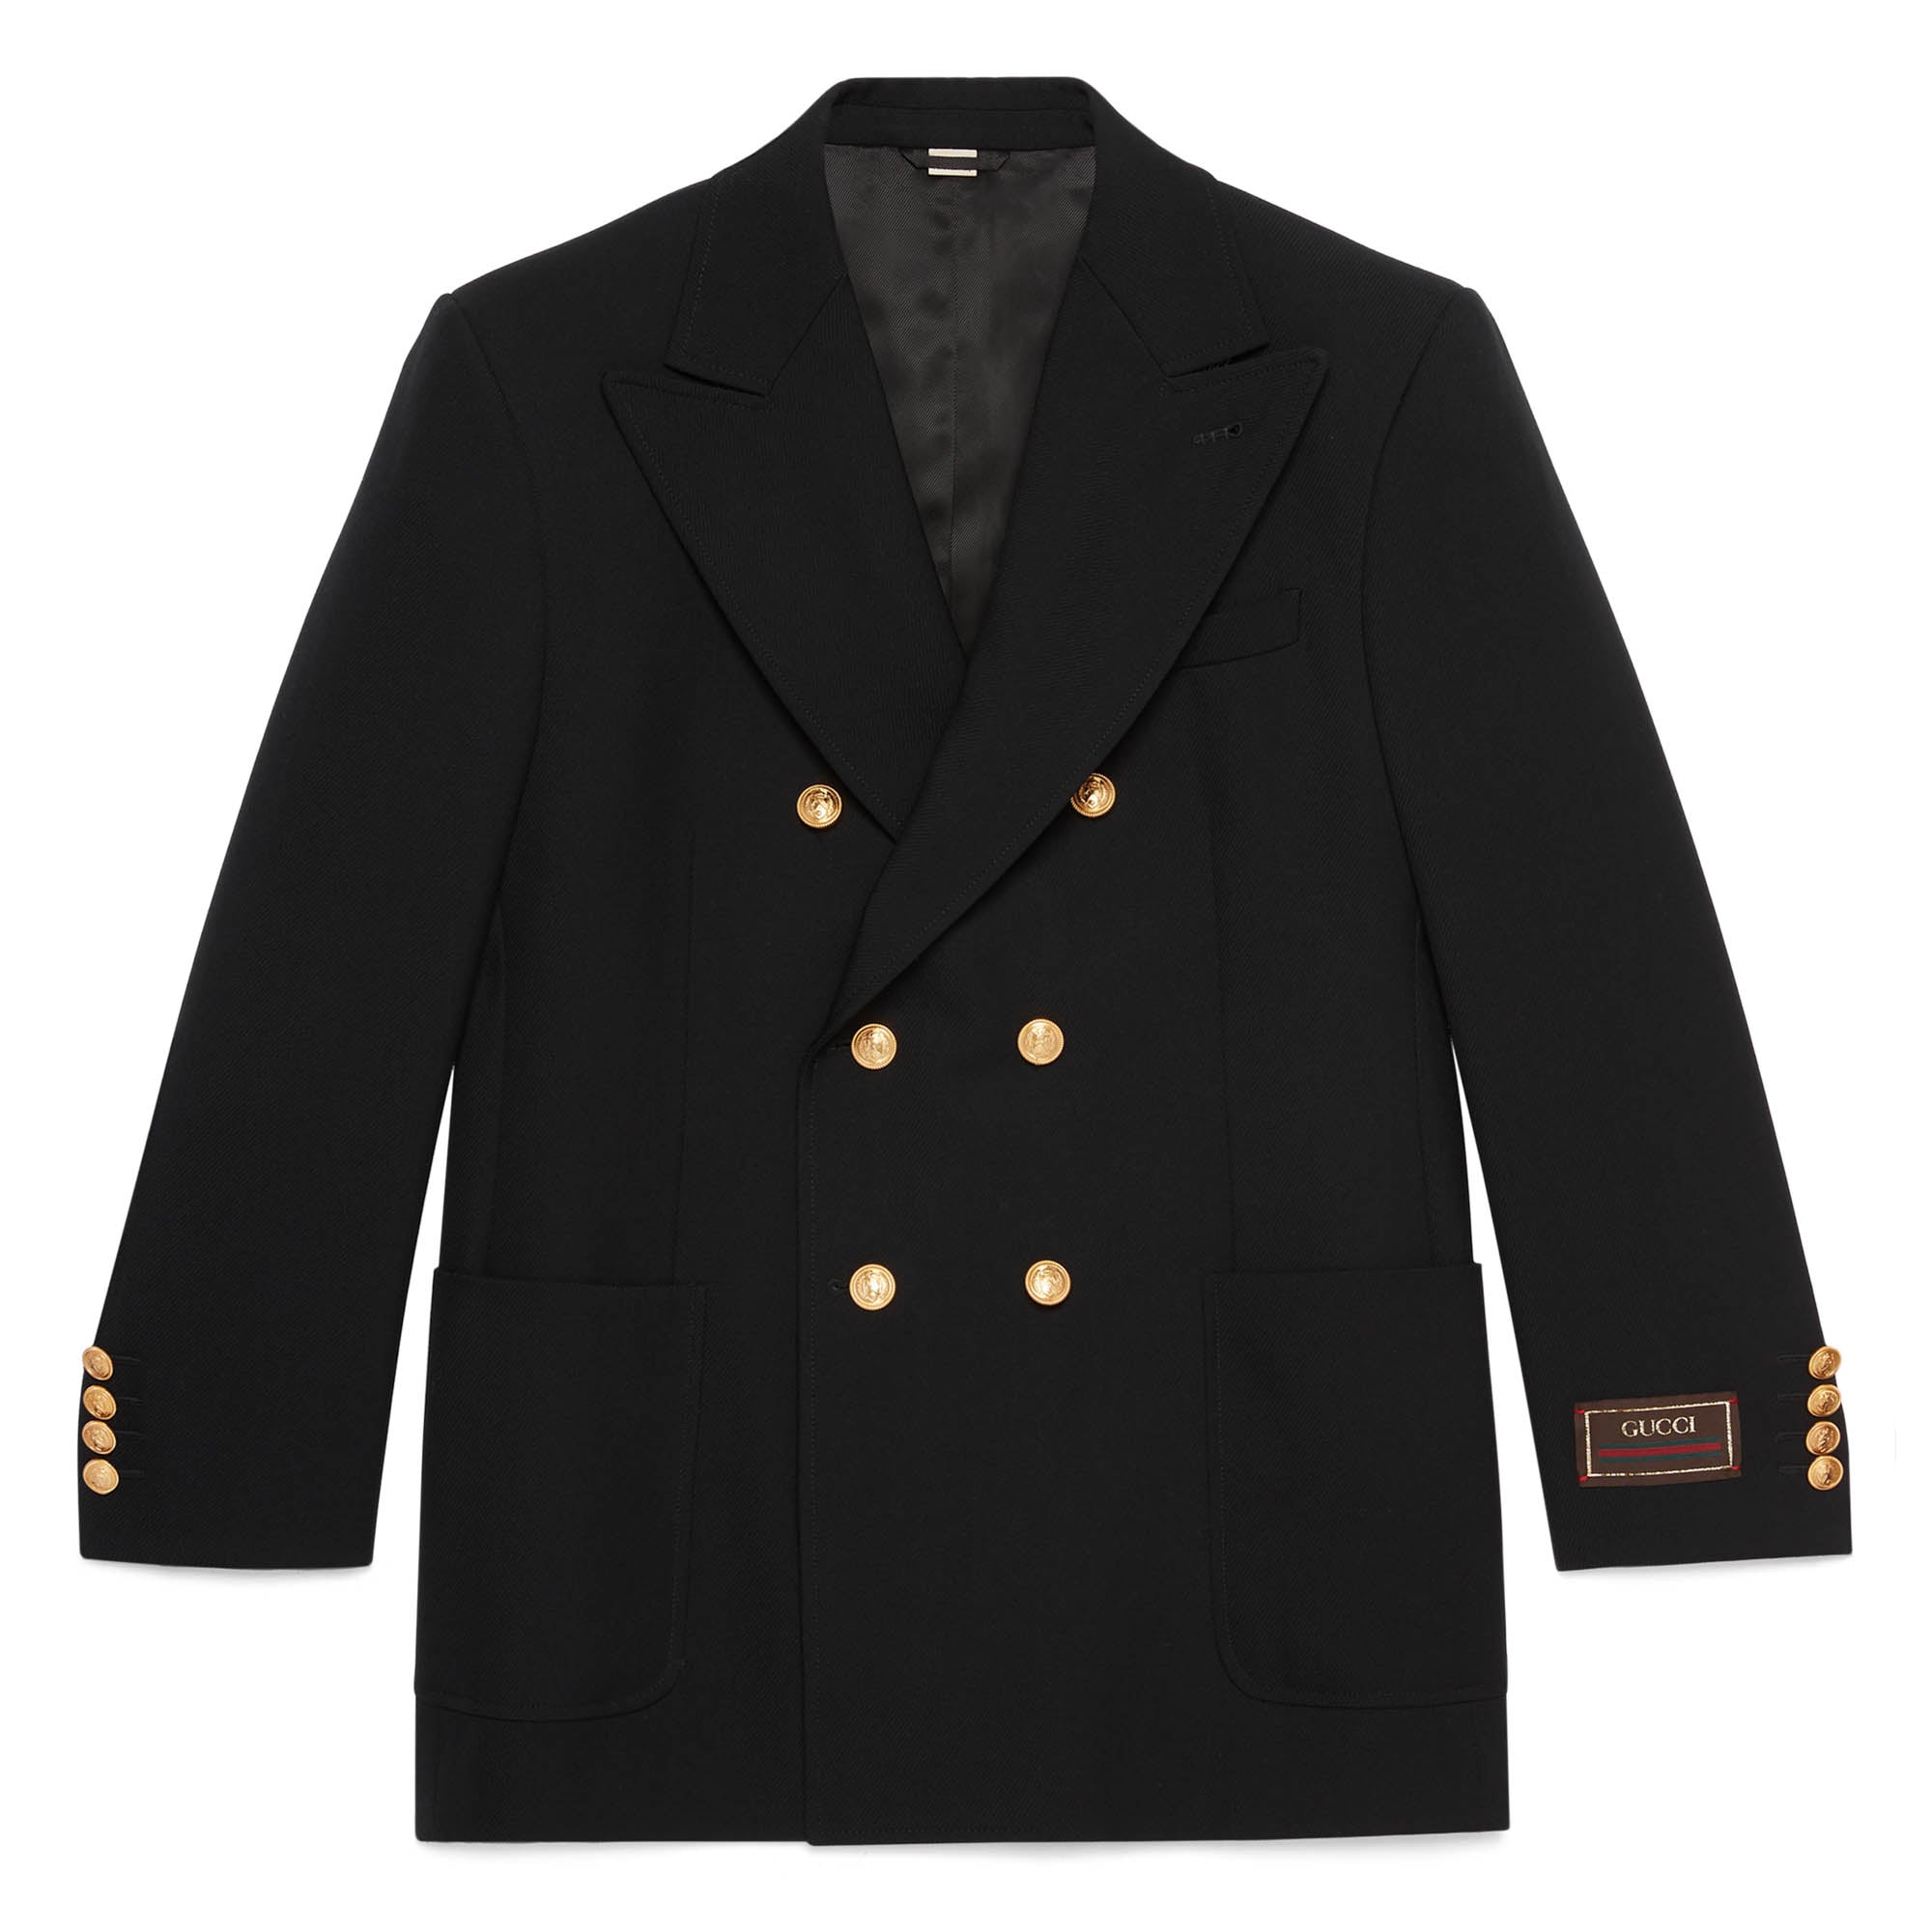 Gucci - Men’s Wool Double-Breasted Jacket - (Black) view 1